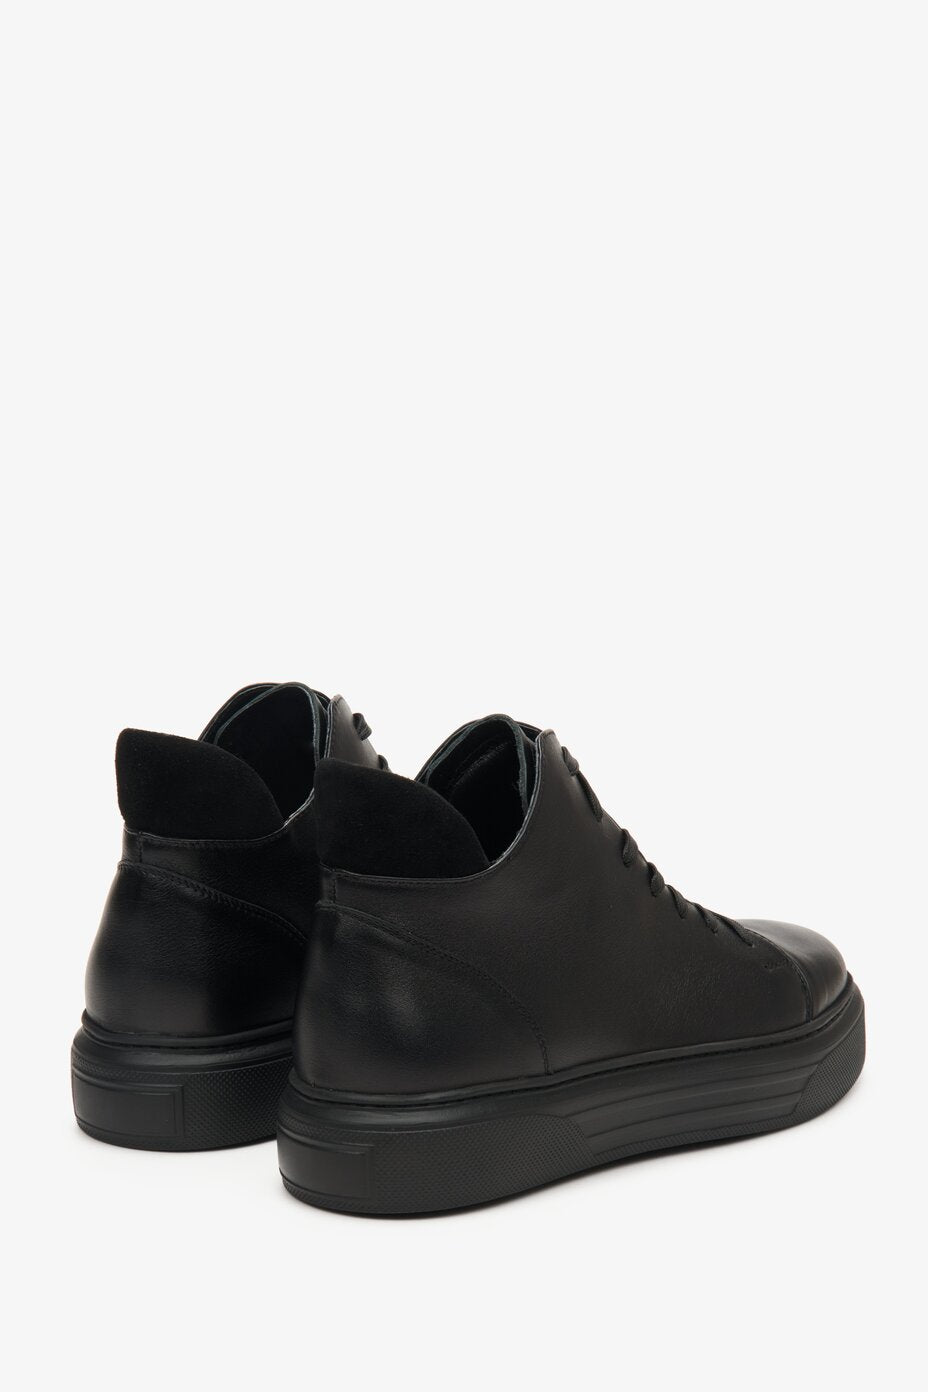 Men's high-top boots in black with laces made of genuine leather by Estro.